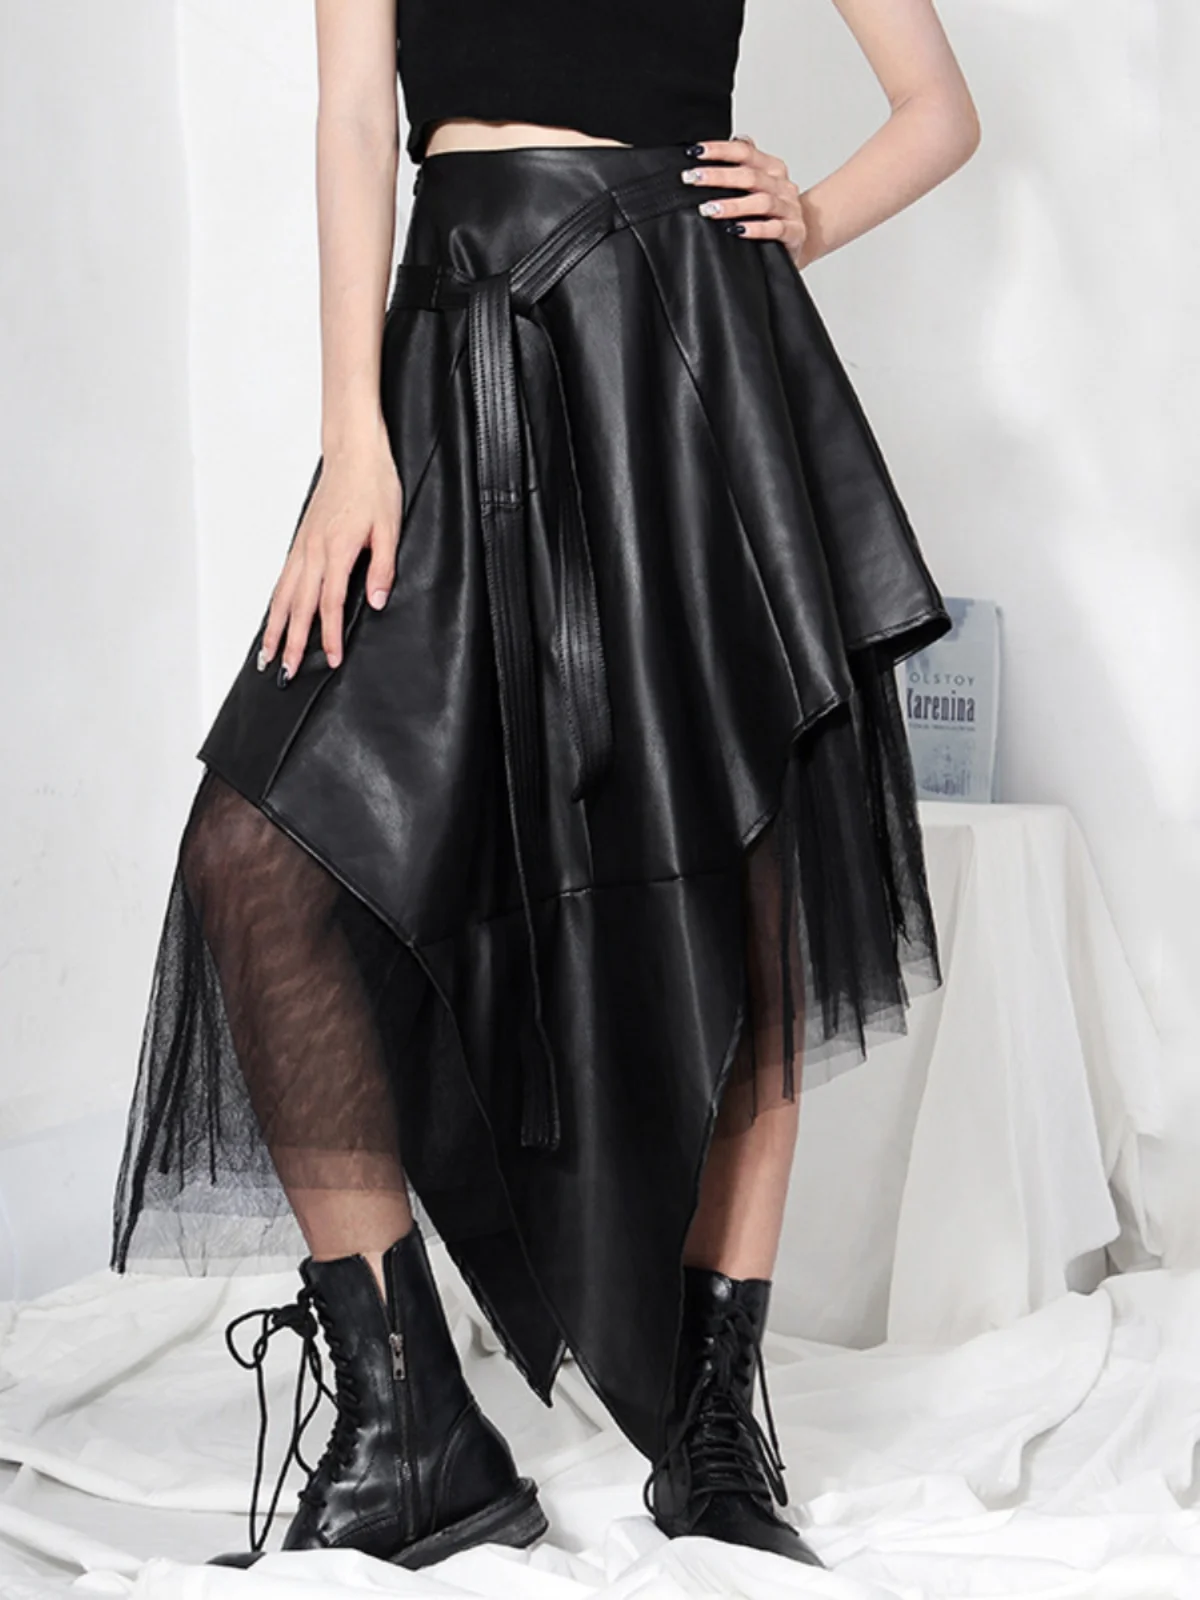 2023 Summer Autumn New PU Leather Skirt In The Long Section Of High Waist A-line Irregular Mesh Skirt women mesh ultra long trailing cathedral wedding veil romantic luxury st